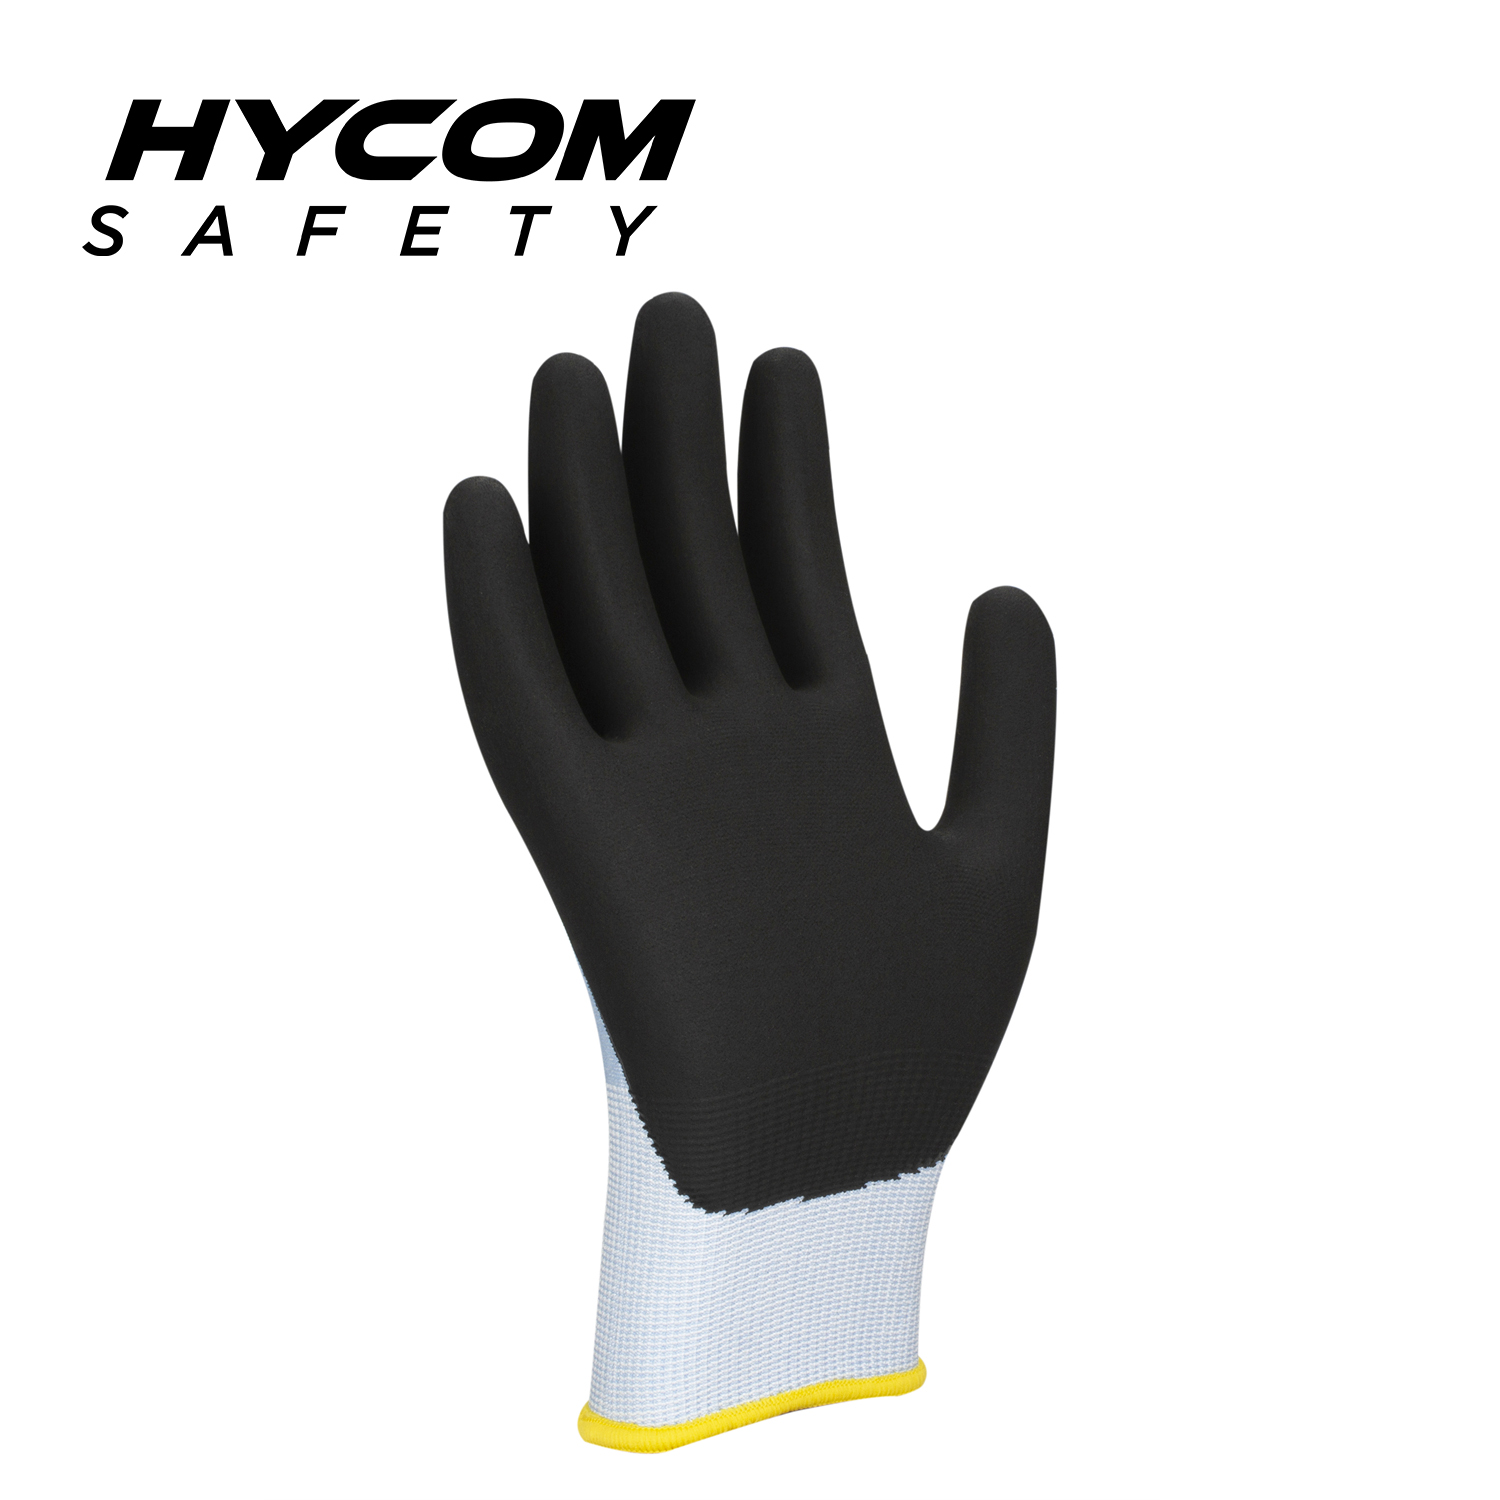 HYCOM 18G ANSI 2 Flexible Cut Resistant Glove with Palm Nitrile Coating Super Thiner Safety Gloves